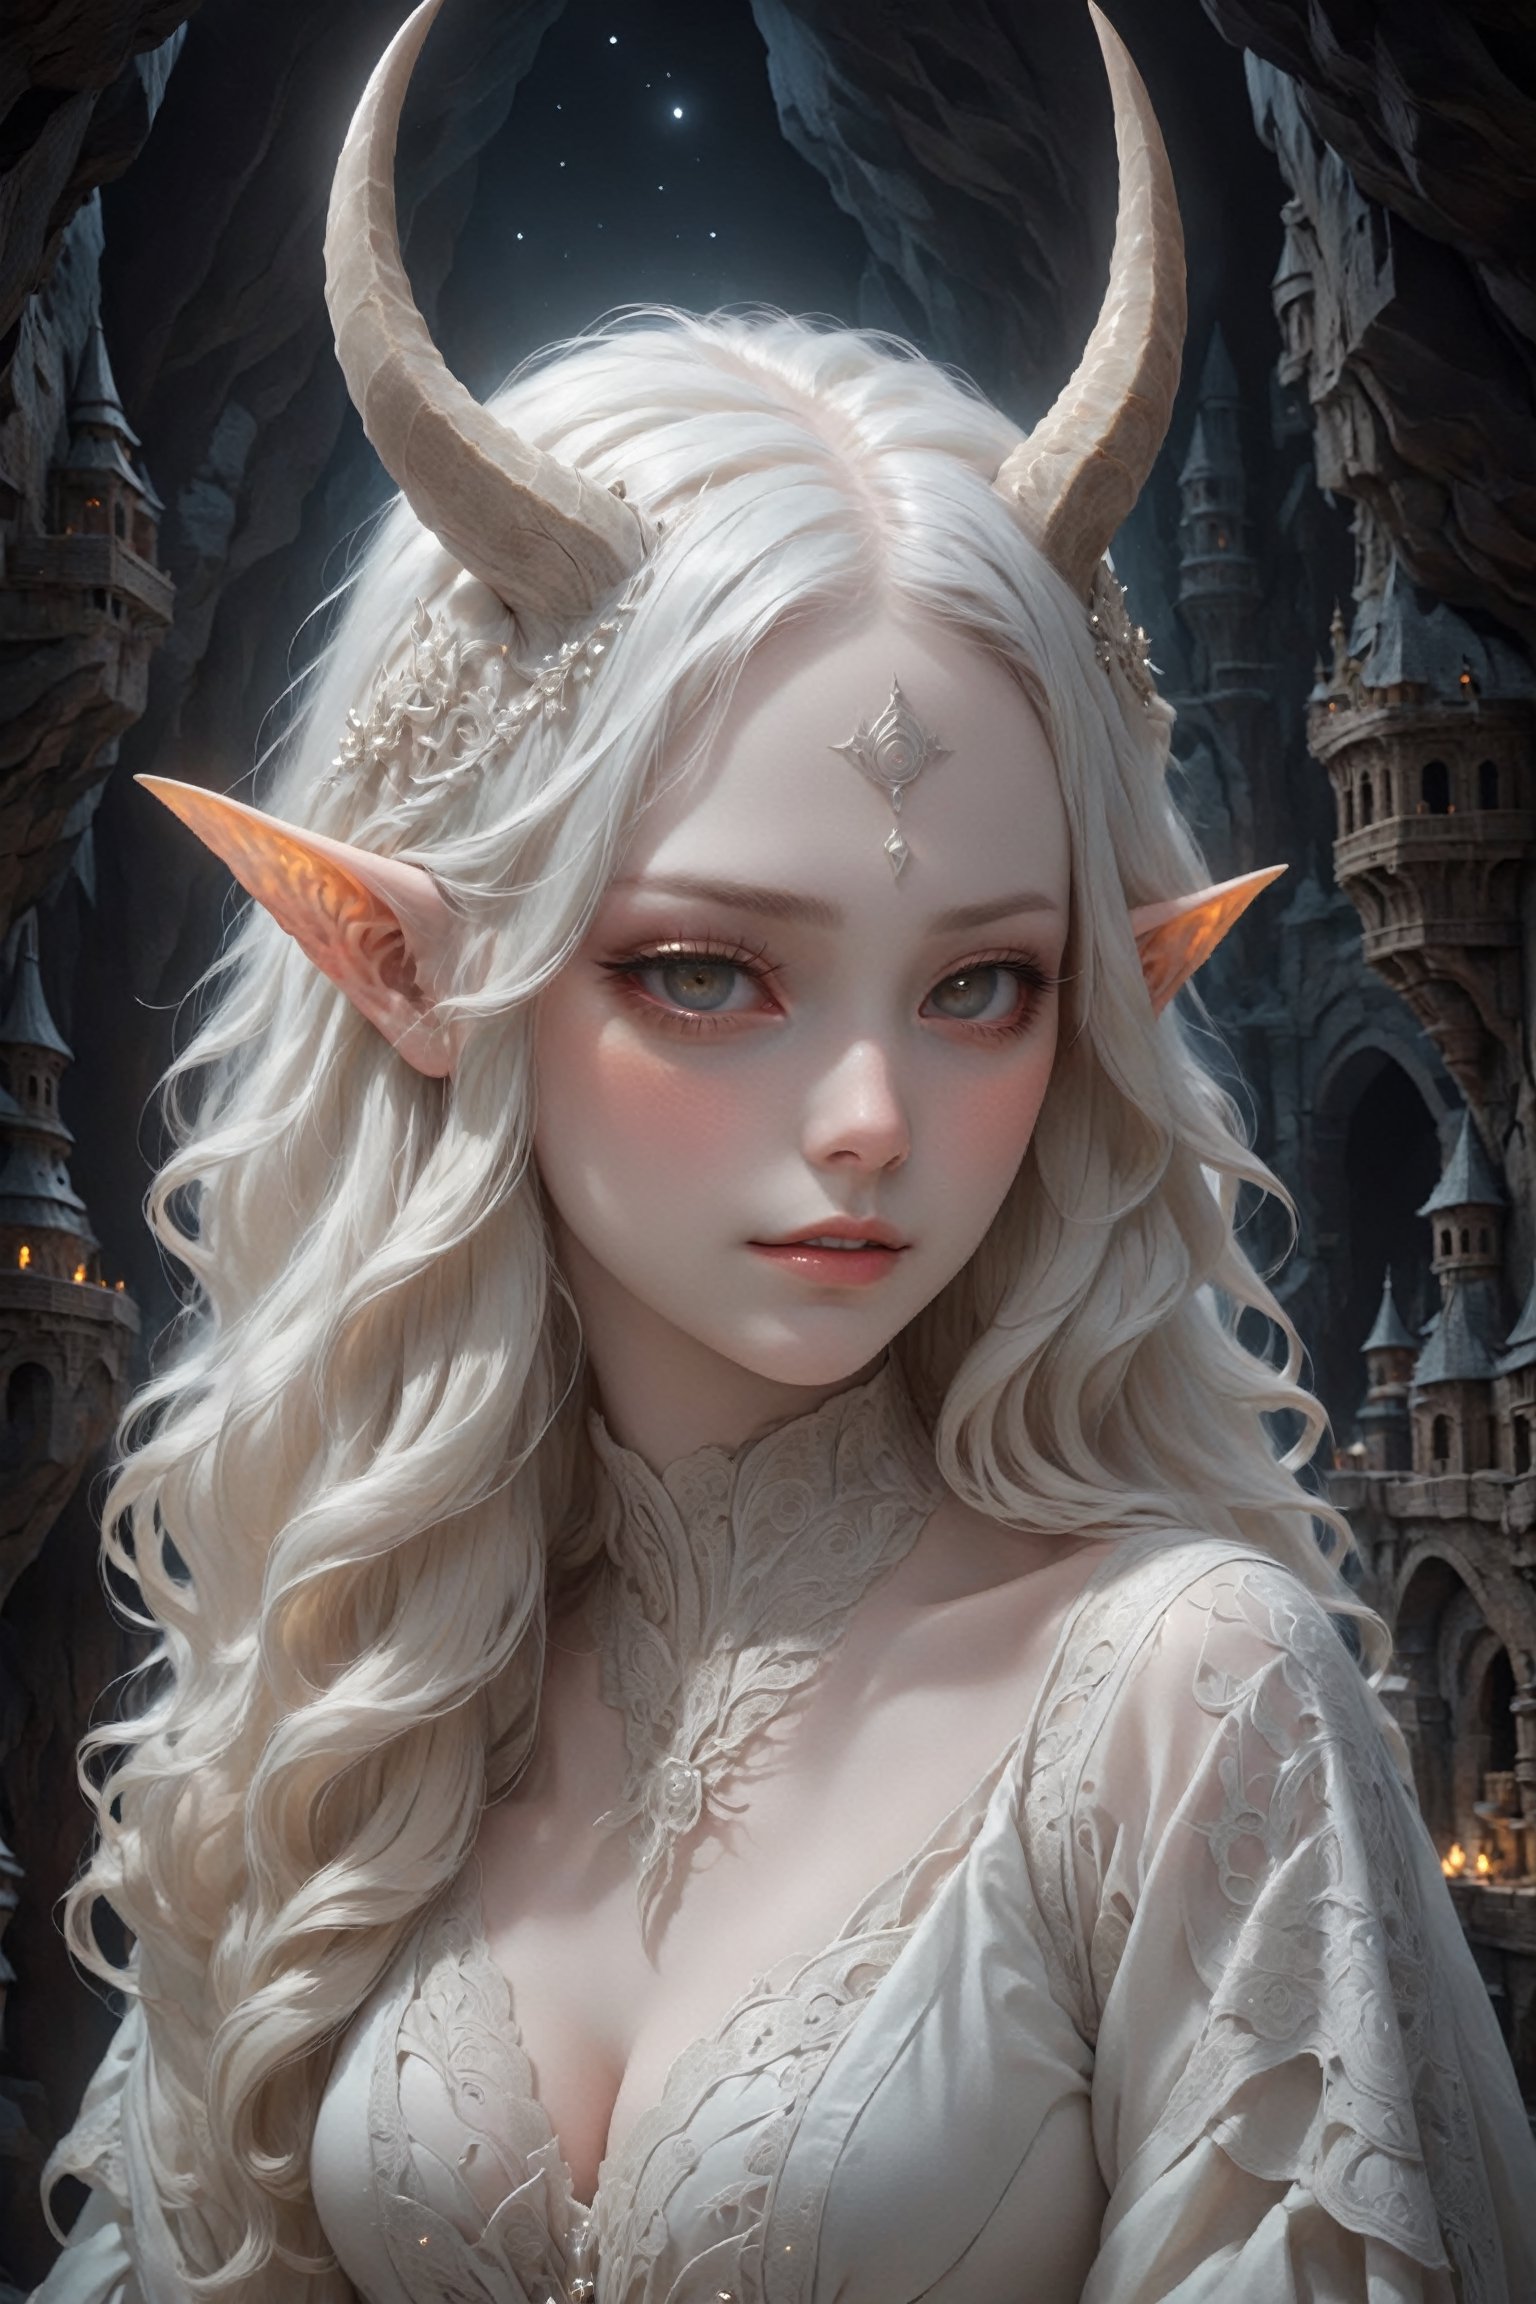 (upper body), (spiral intricate horns:1.2), sensual albino demon girl with enchantingly beautiful, alabaster skin, {{{naked breasts}}}, thinking, thoughtful, A benevolent smile, girl has beautiful deep eyes, soft expression, Depth and Dimension in the Pupils, Her porcelain-like white skin reflects an almost celestial glow, highlighting her ethereal nature, Every detail of her divine lace costume is meticulously crafted, adorned with jewels that sparkle with a divine radiance, mysterious smoky background, an aura of supernatural allure, ornate jewels, mesmerizing dance of light that enhances her divine presence, moonlit garden, mystical realm, the scene Illuminated  with soft enchanting light to accentuate the magical and mysterious atmosphere, goth person, realistic, Wonder of Art and Beauty, ghost person,ghost person,F41Arm0rXL ,DonMM4g1cXL ,Dwarven City